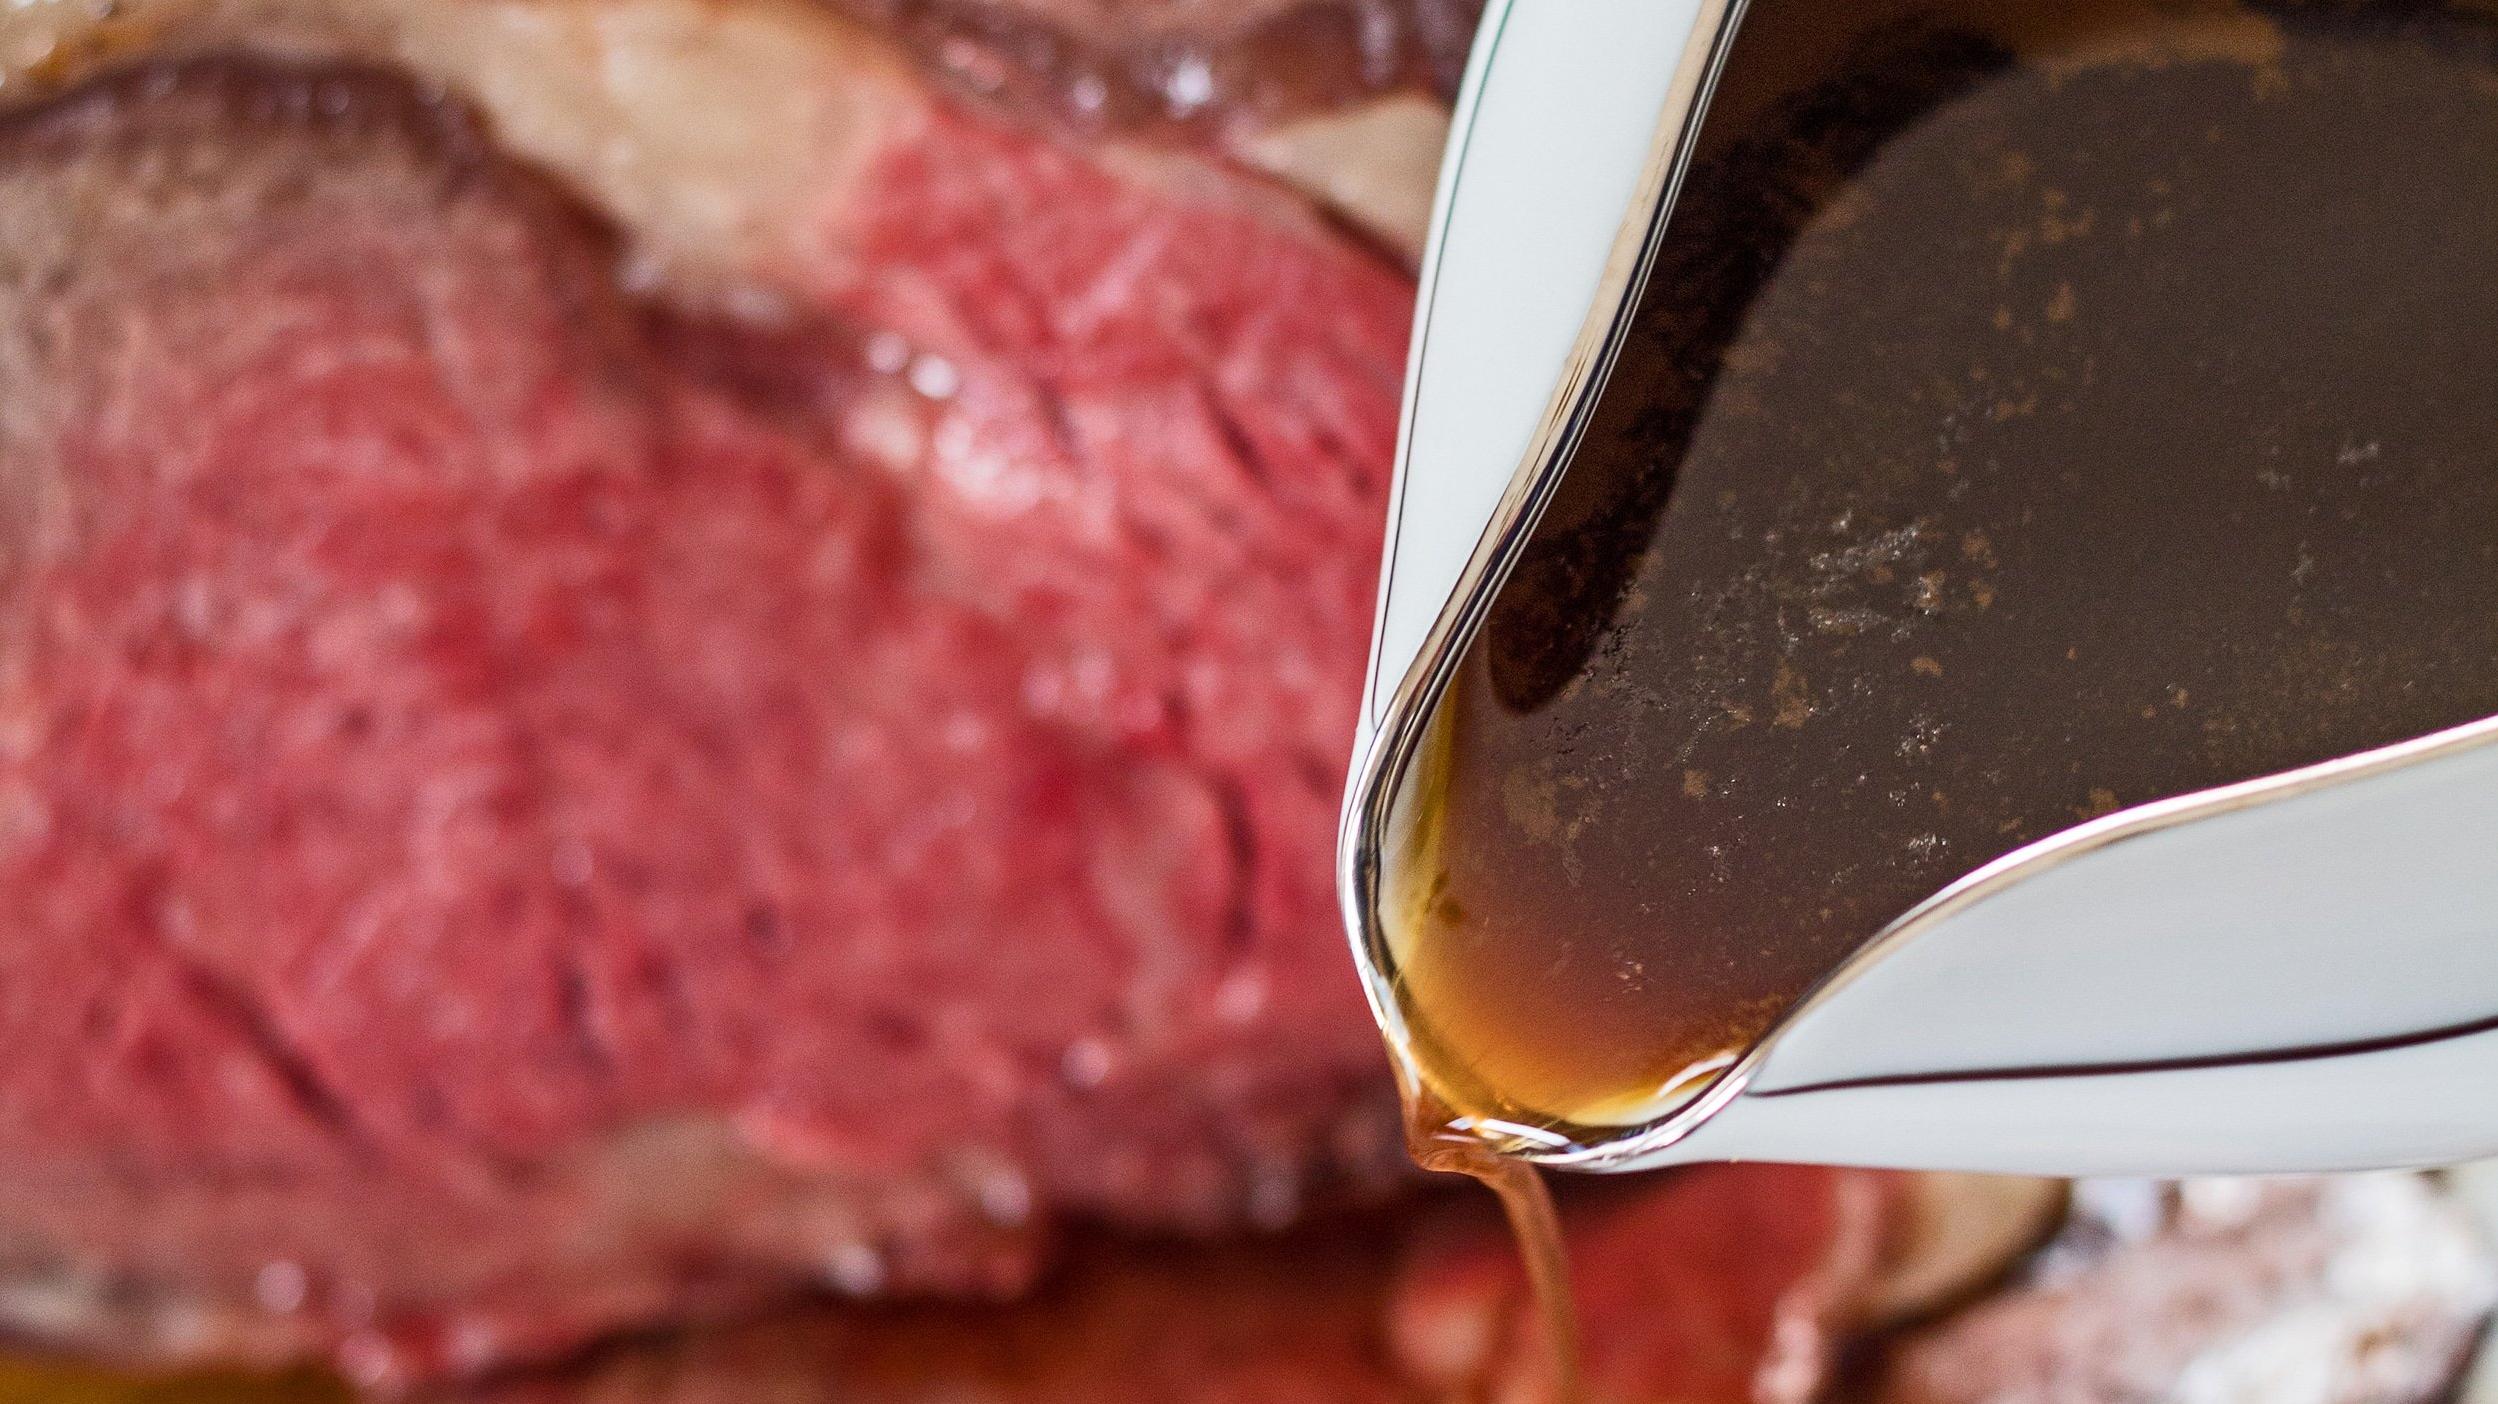  Warm up this winter with a decadent Prime Rib served with a flavorful Cabernet Jus